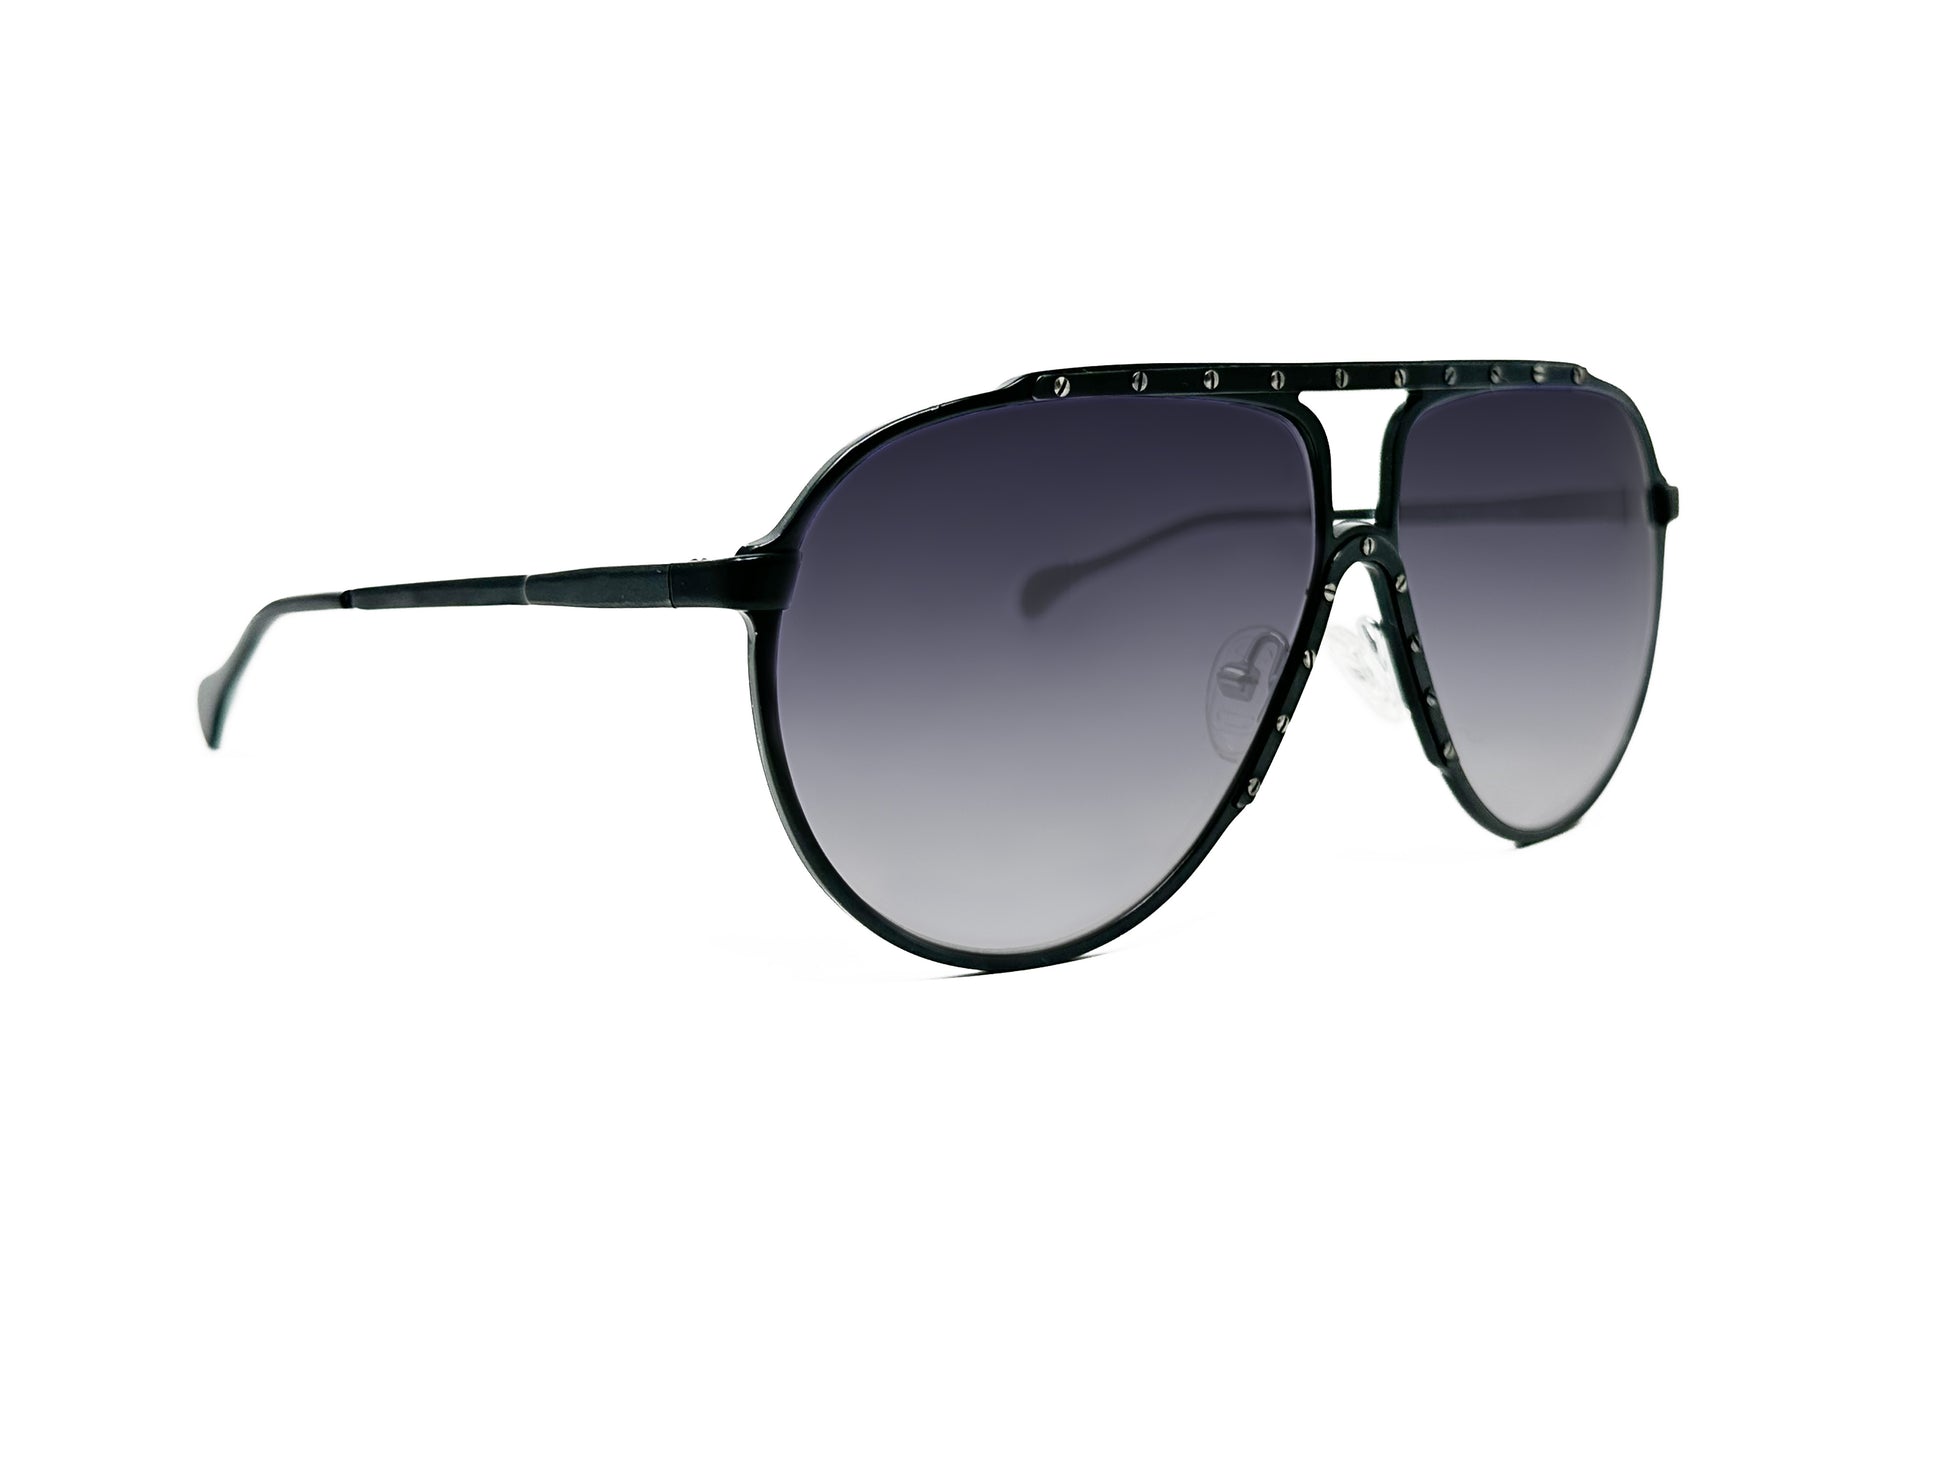 Alpina, large rounded aviator sunglass with silver screws adorning frame. Model: 2266231. Color: Black with silver screws. Side view.